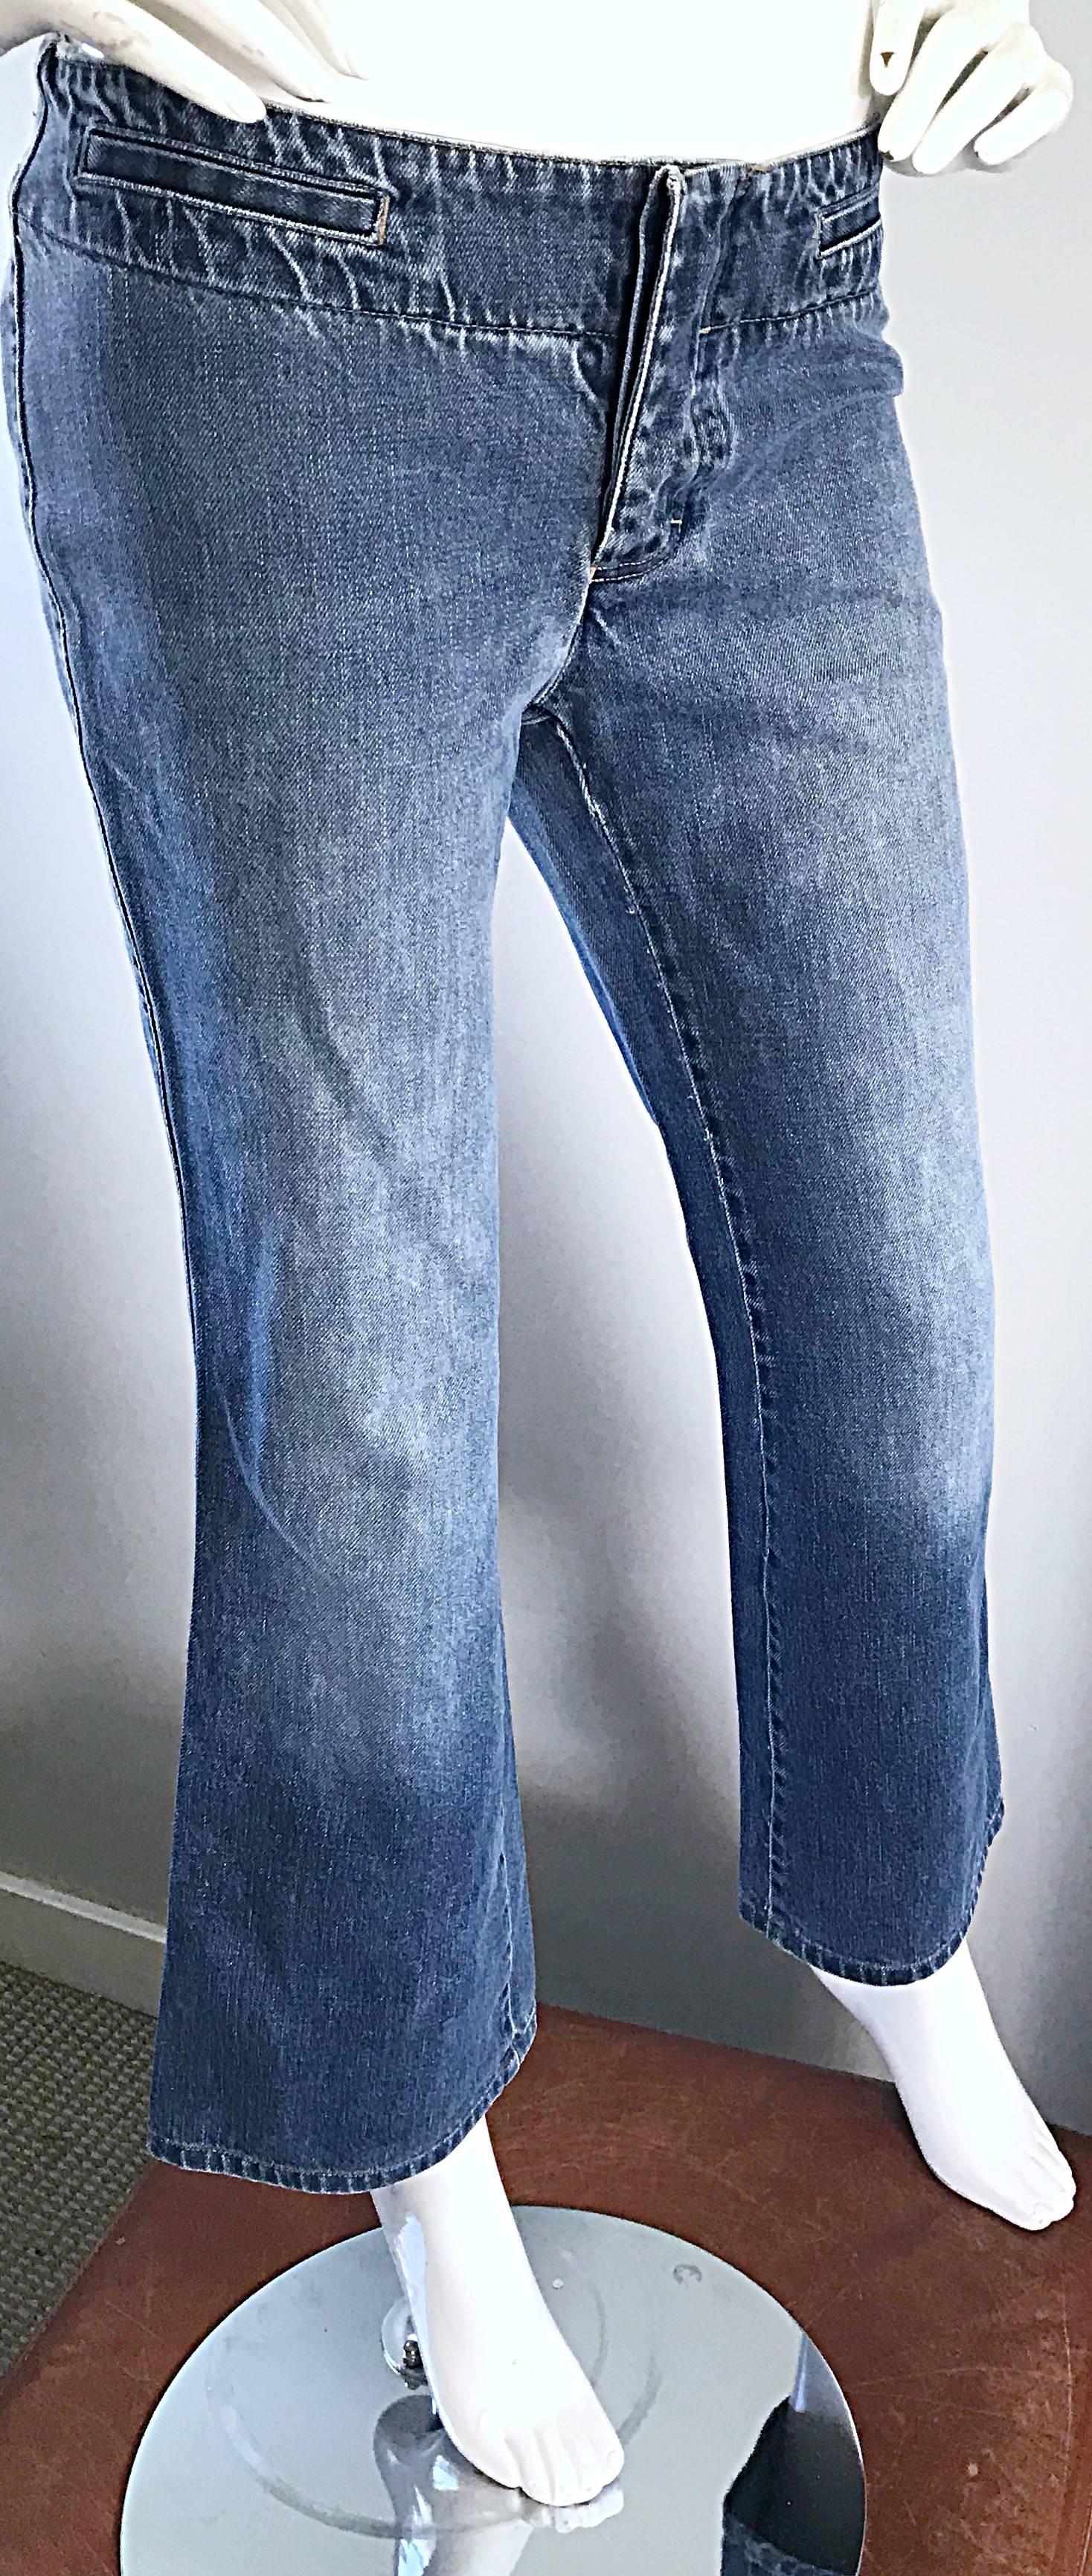 Women's Tom Ford for Gucci Size 6 Low Rise Blue Jeans Denim Flare Leg Cropped Culottes  For Sale